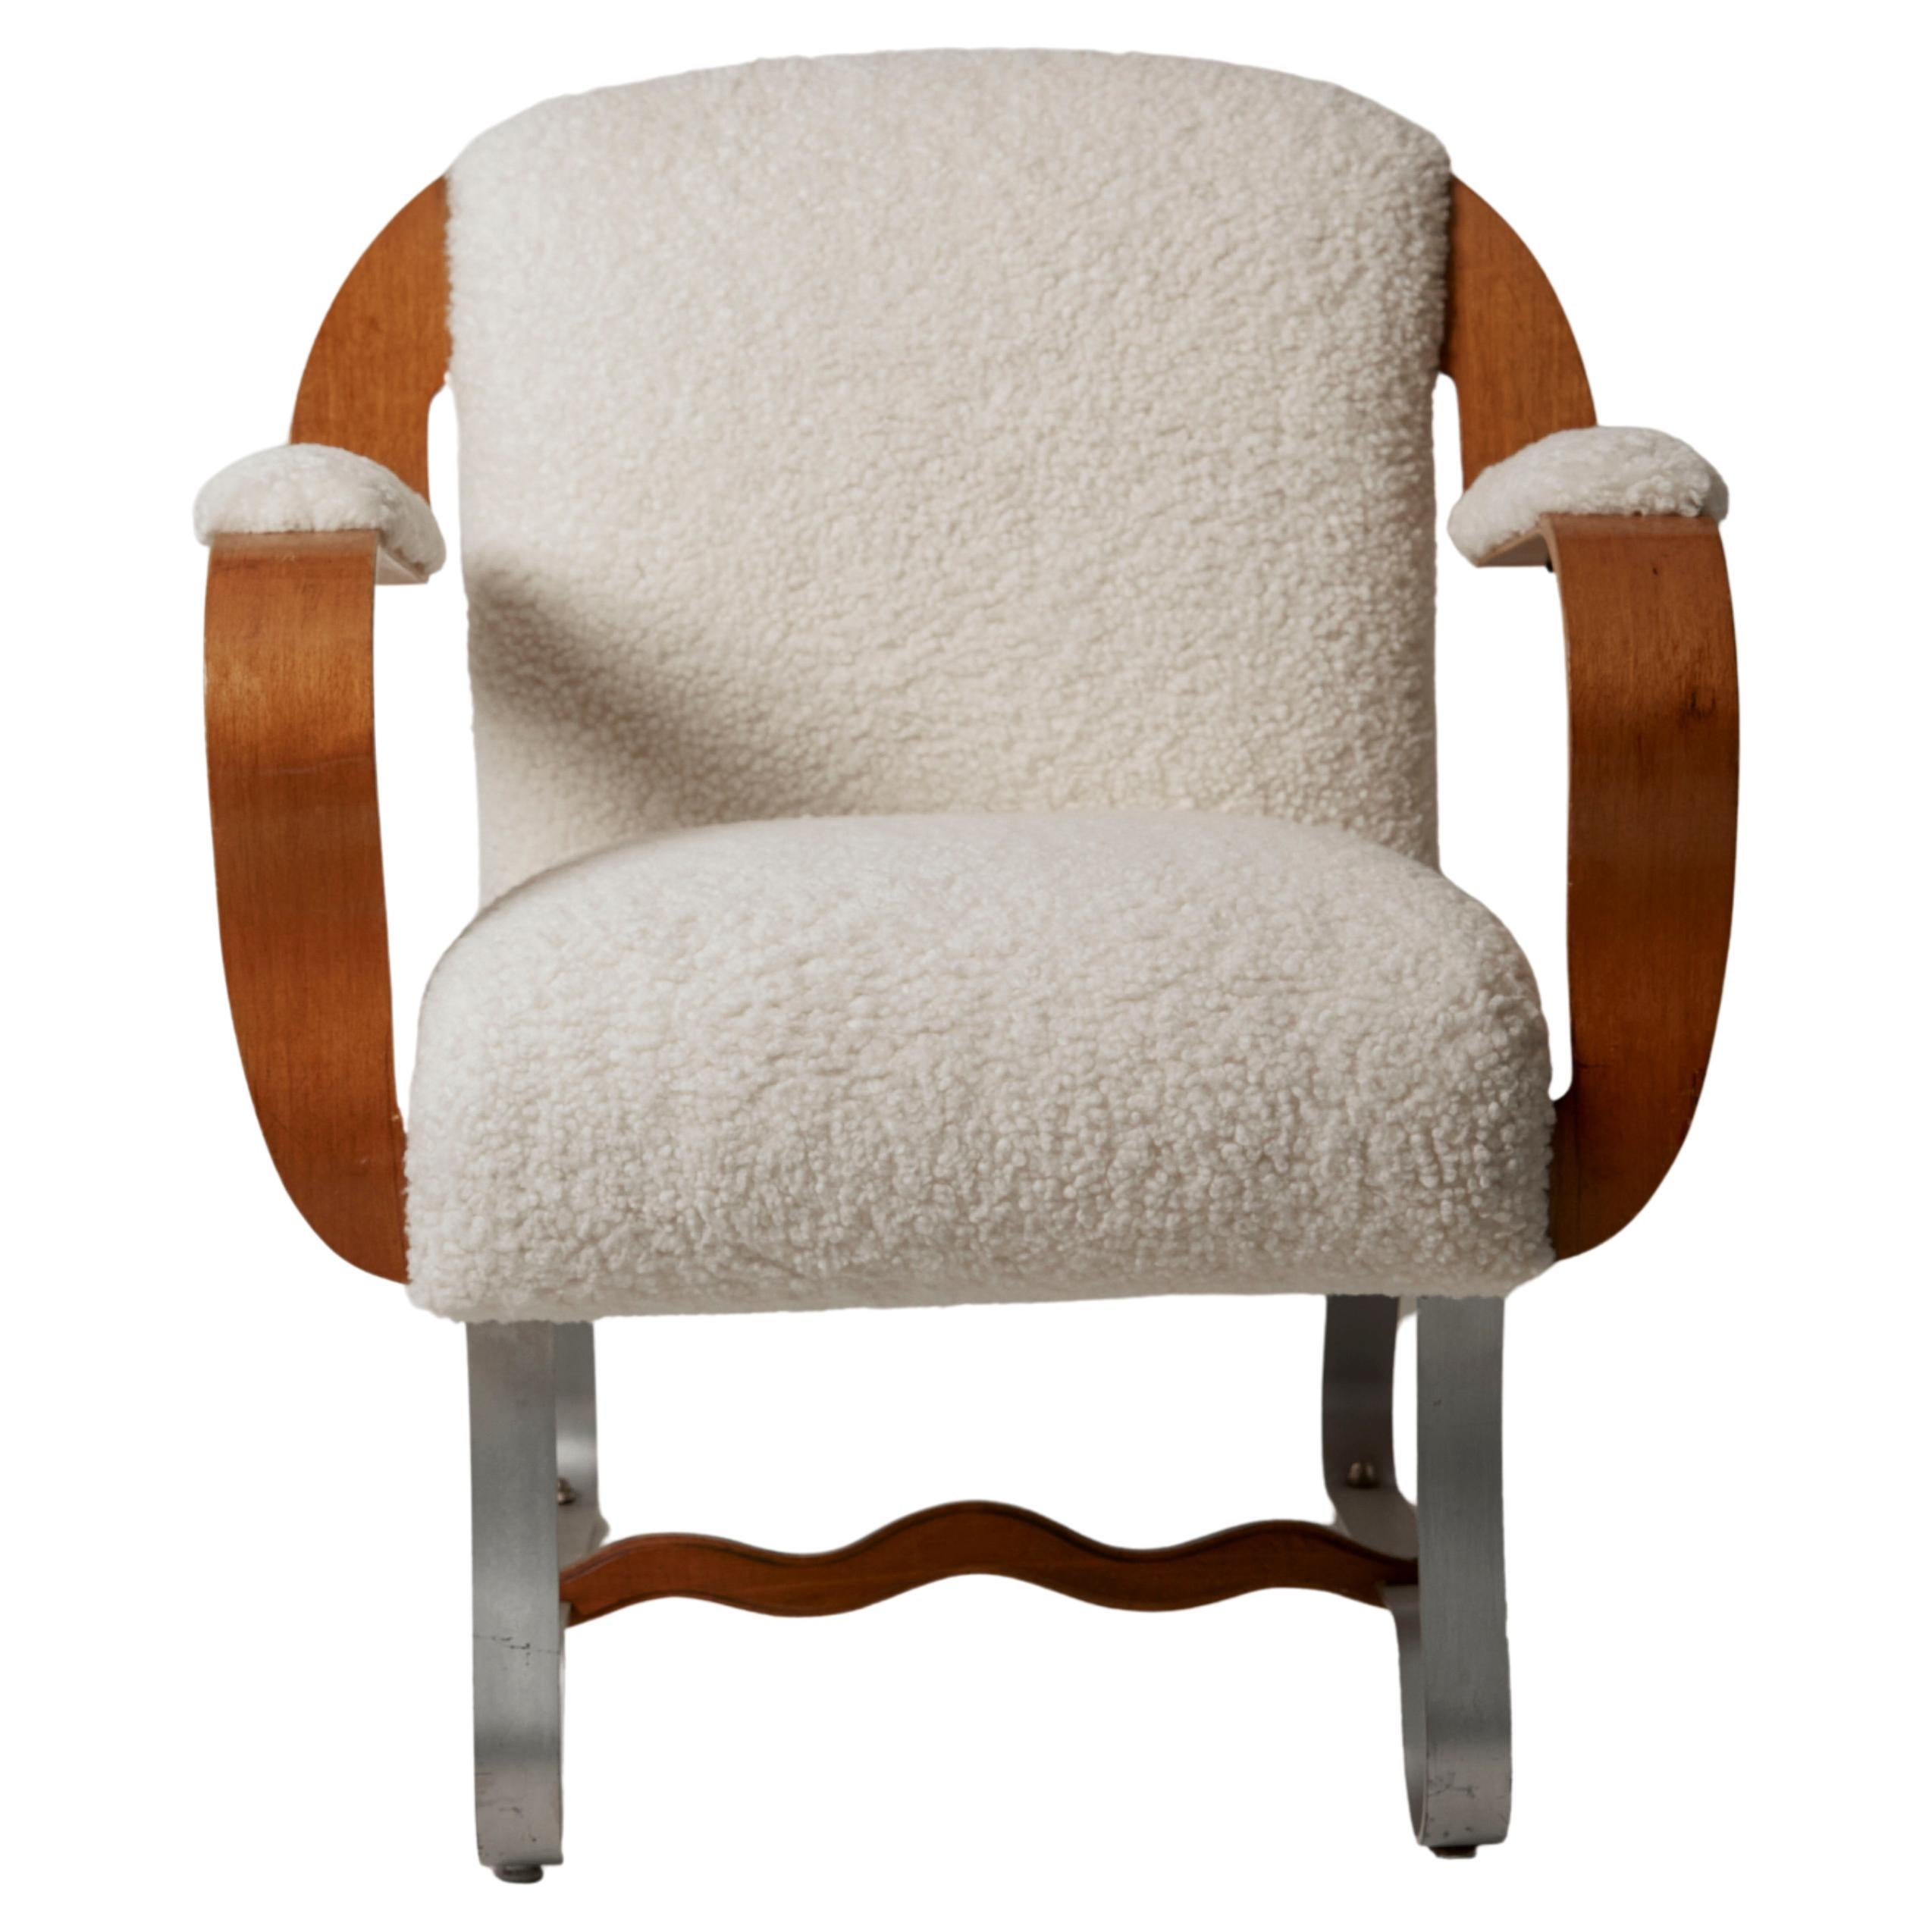 1970's Italy Vintage Poltrona Frau Arm Chair in Shearling For Sale